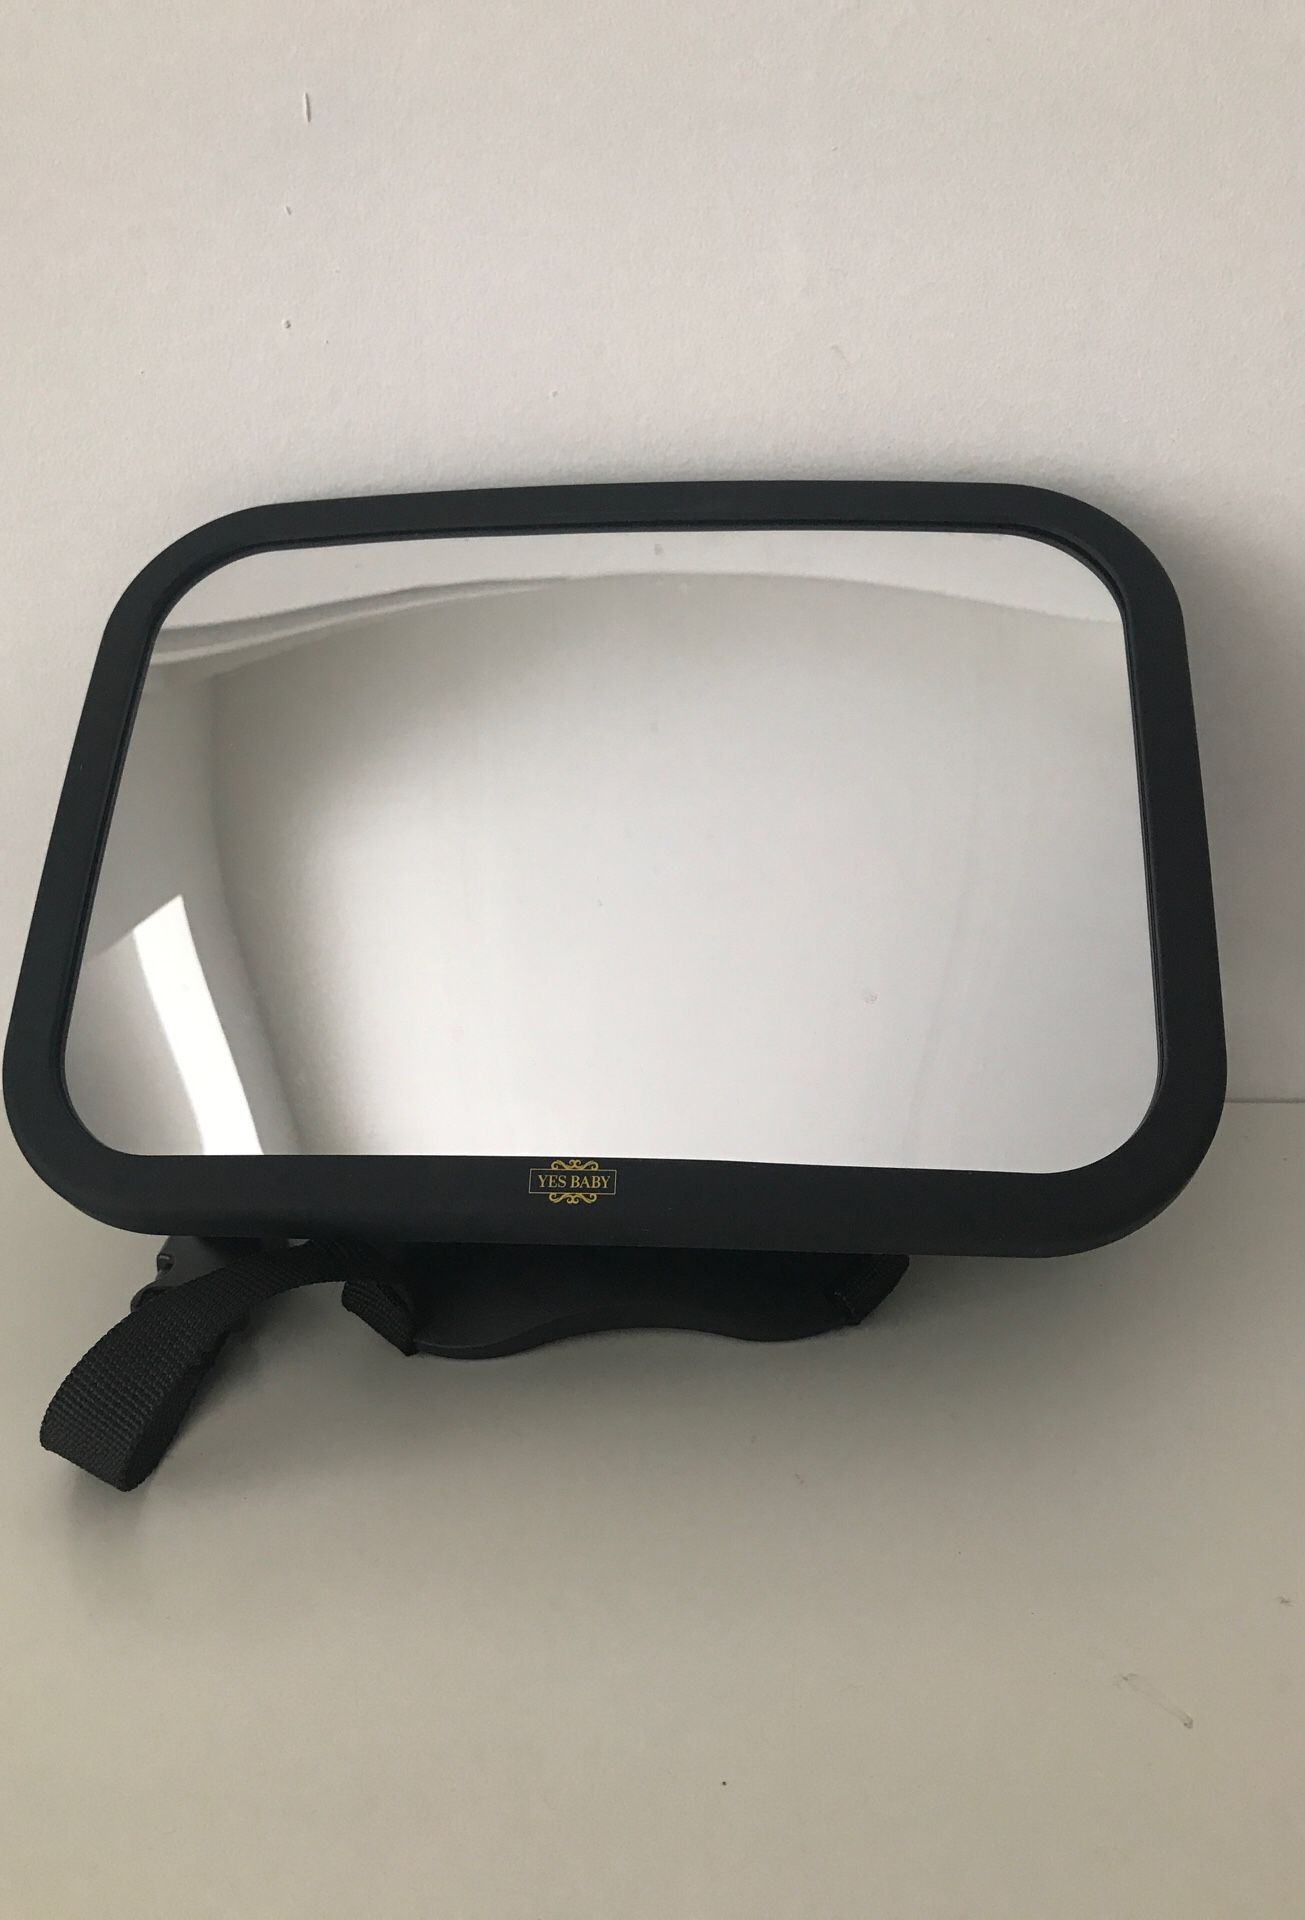 Car mirror for baby monitoring